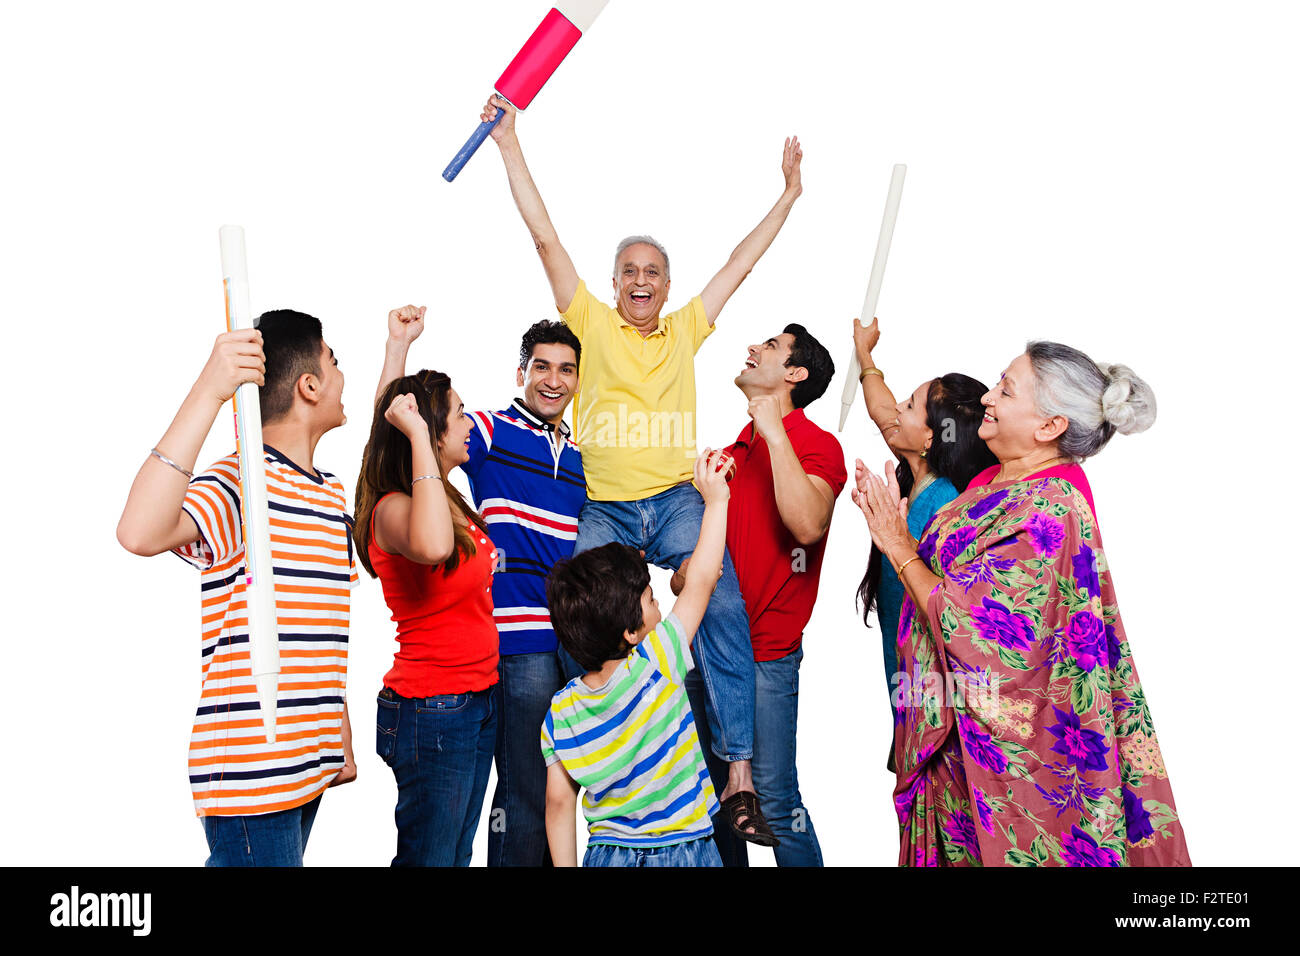 indian group Joint Family Playing Cricket enjoy Stock Photo